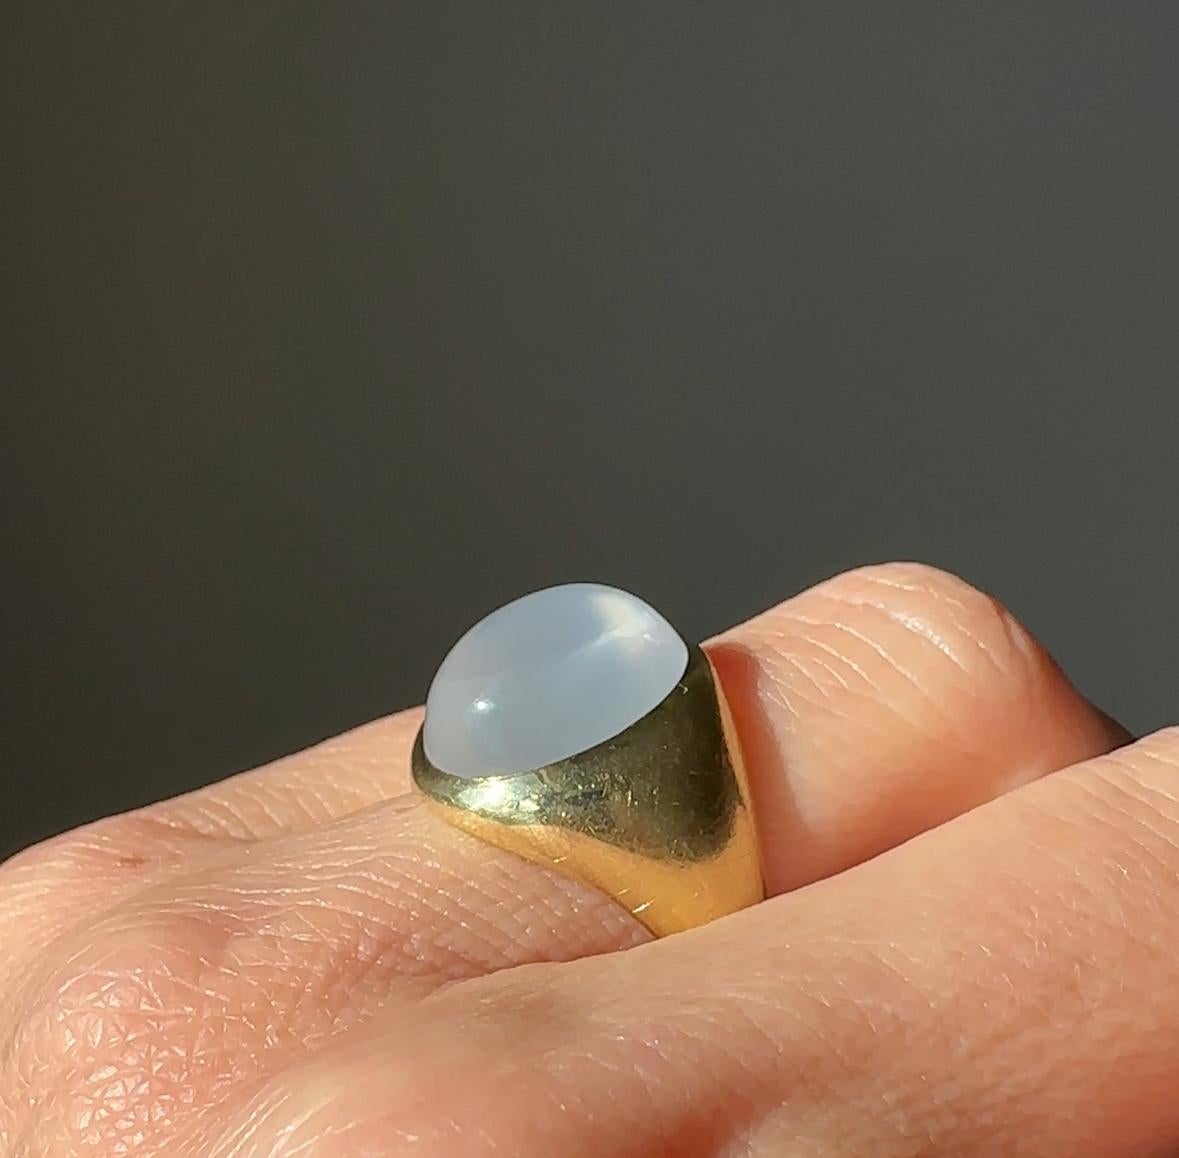 This sleek mid-twentieth century ring features a glowing 9.3 carat moonstone flush set in 14 karat yellow gold. Currently a ring size 6.75

 

Weight: 10.2 grams

Moonstone 14.19 x 11.37 x 6.7 mm - estimated 9.3 carats

Markings: 1(S)4